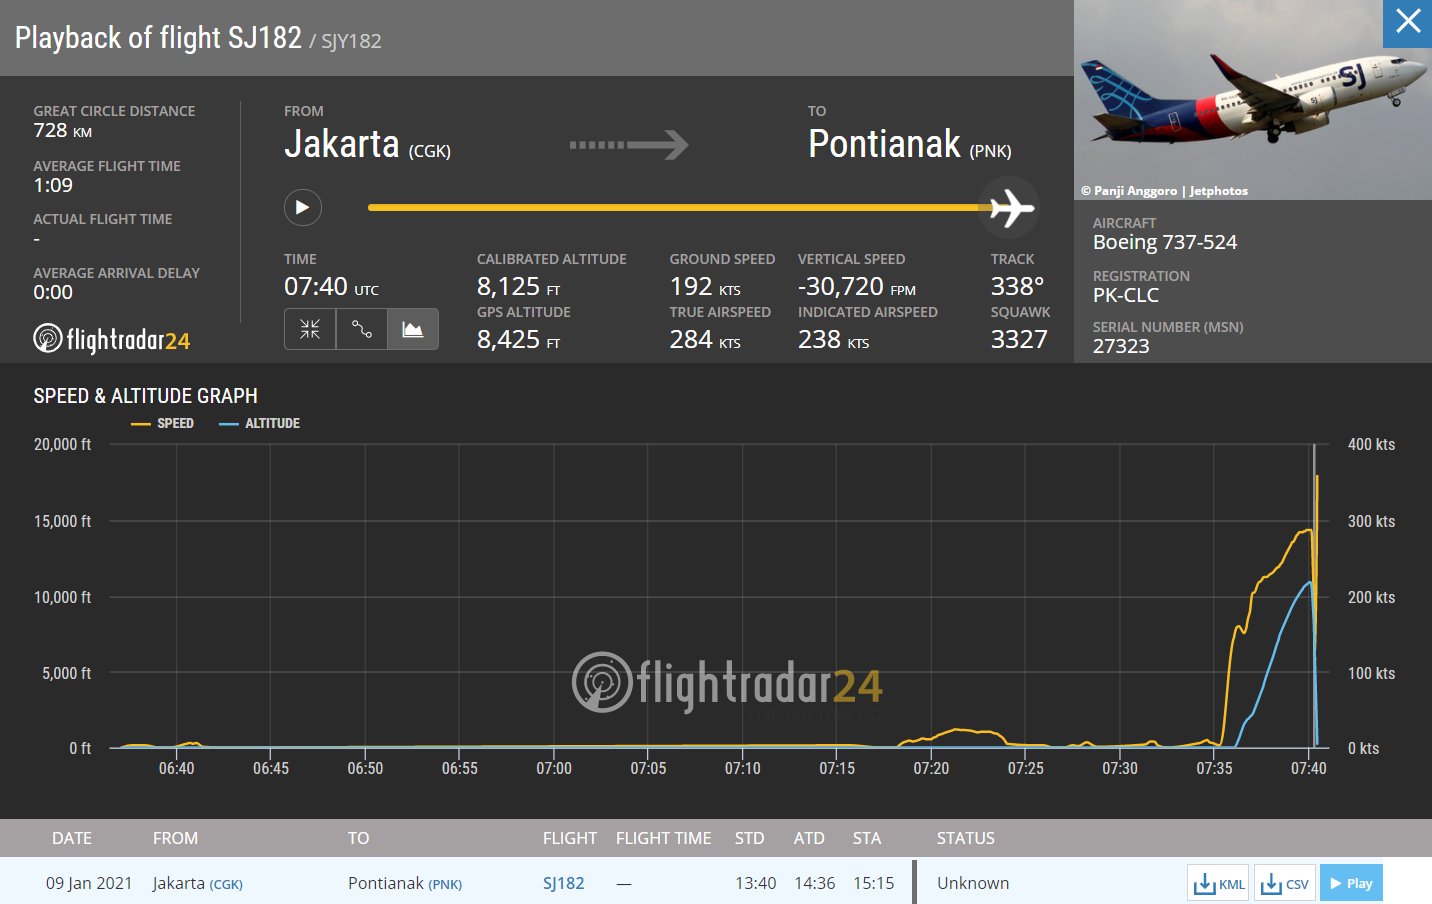 Sriwijaya Air flight #SJ182 lost more than 10.000 feet of altitude in less than one minute, about 4 minutes after departure from Jakarta.